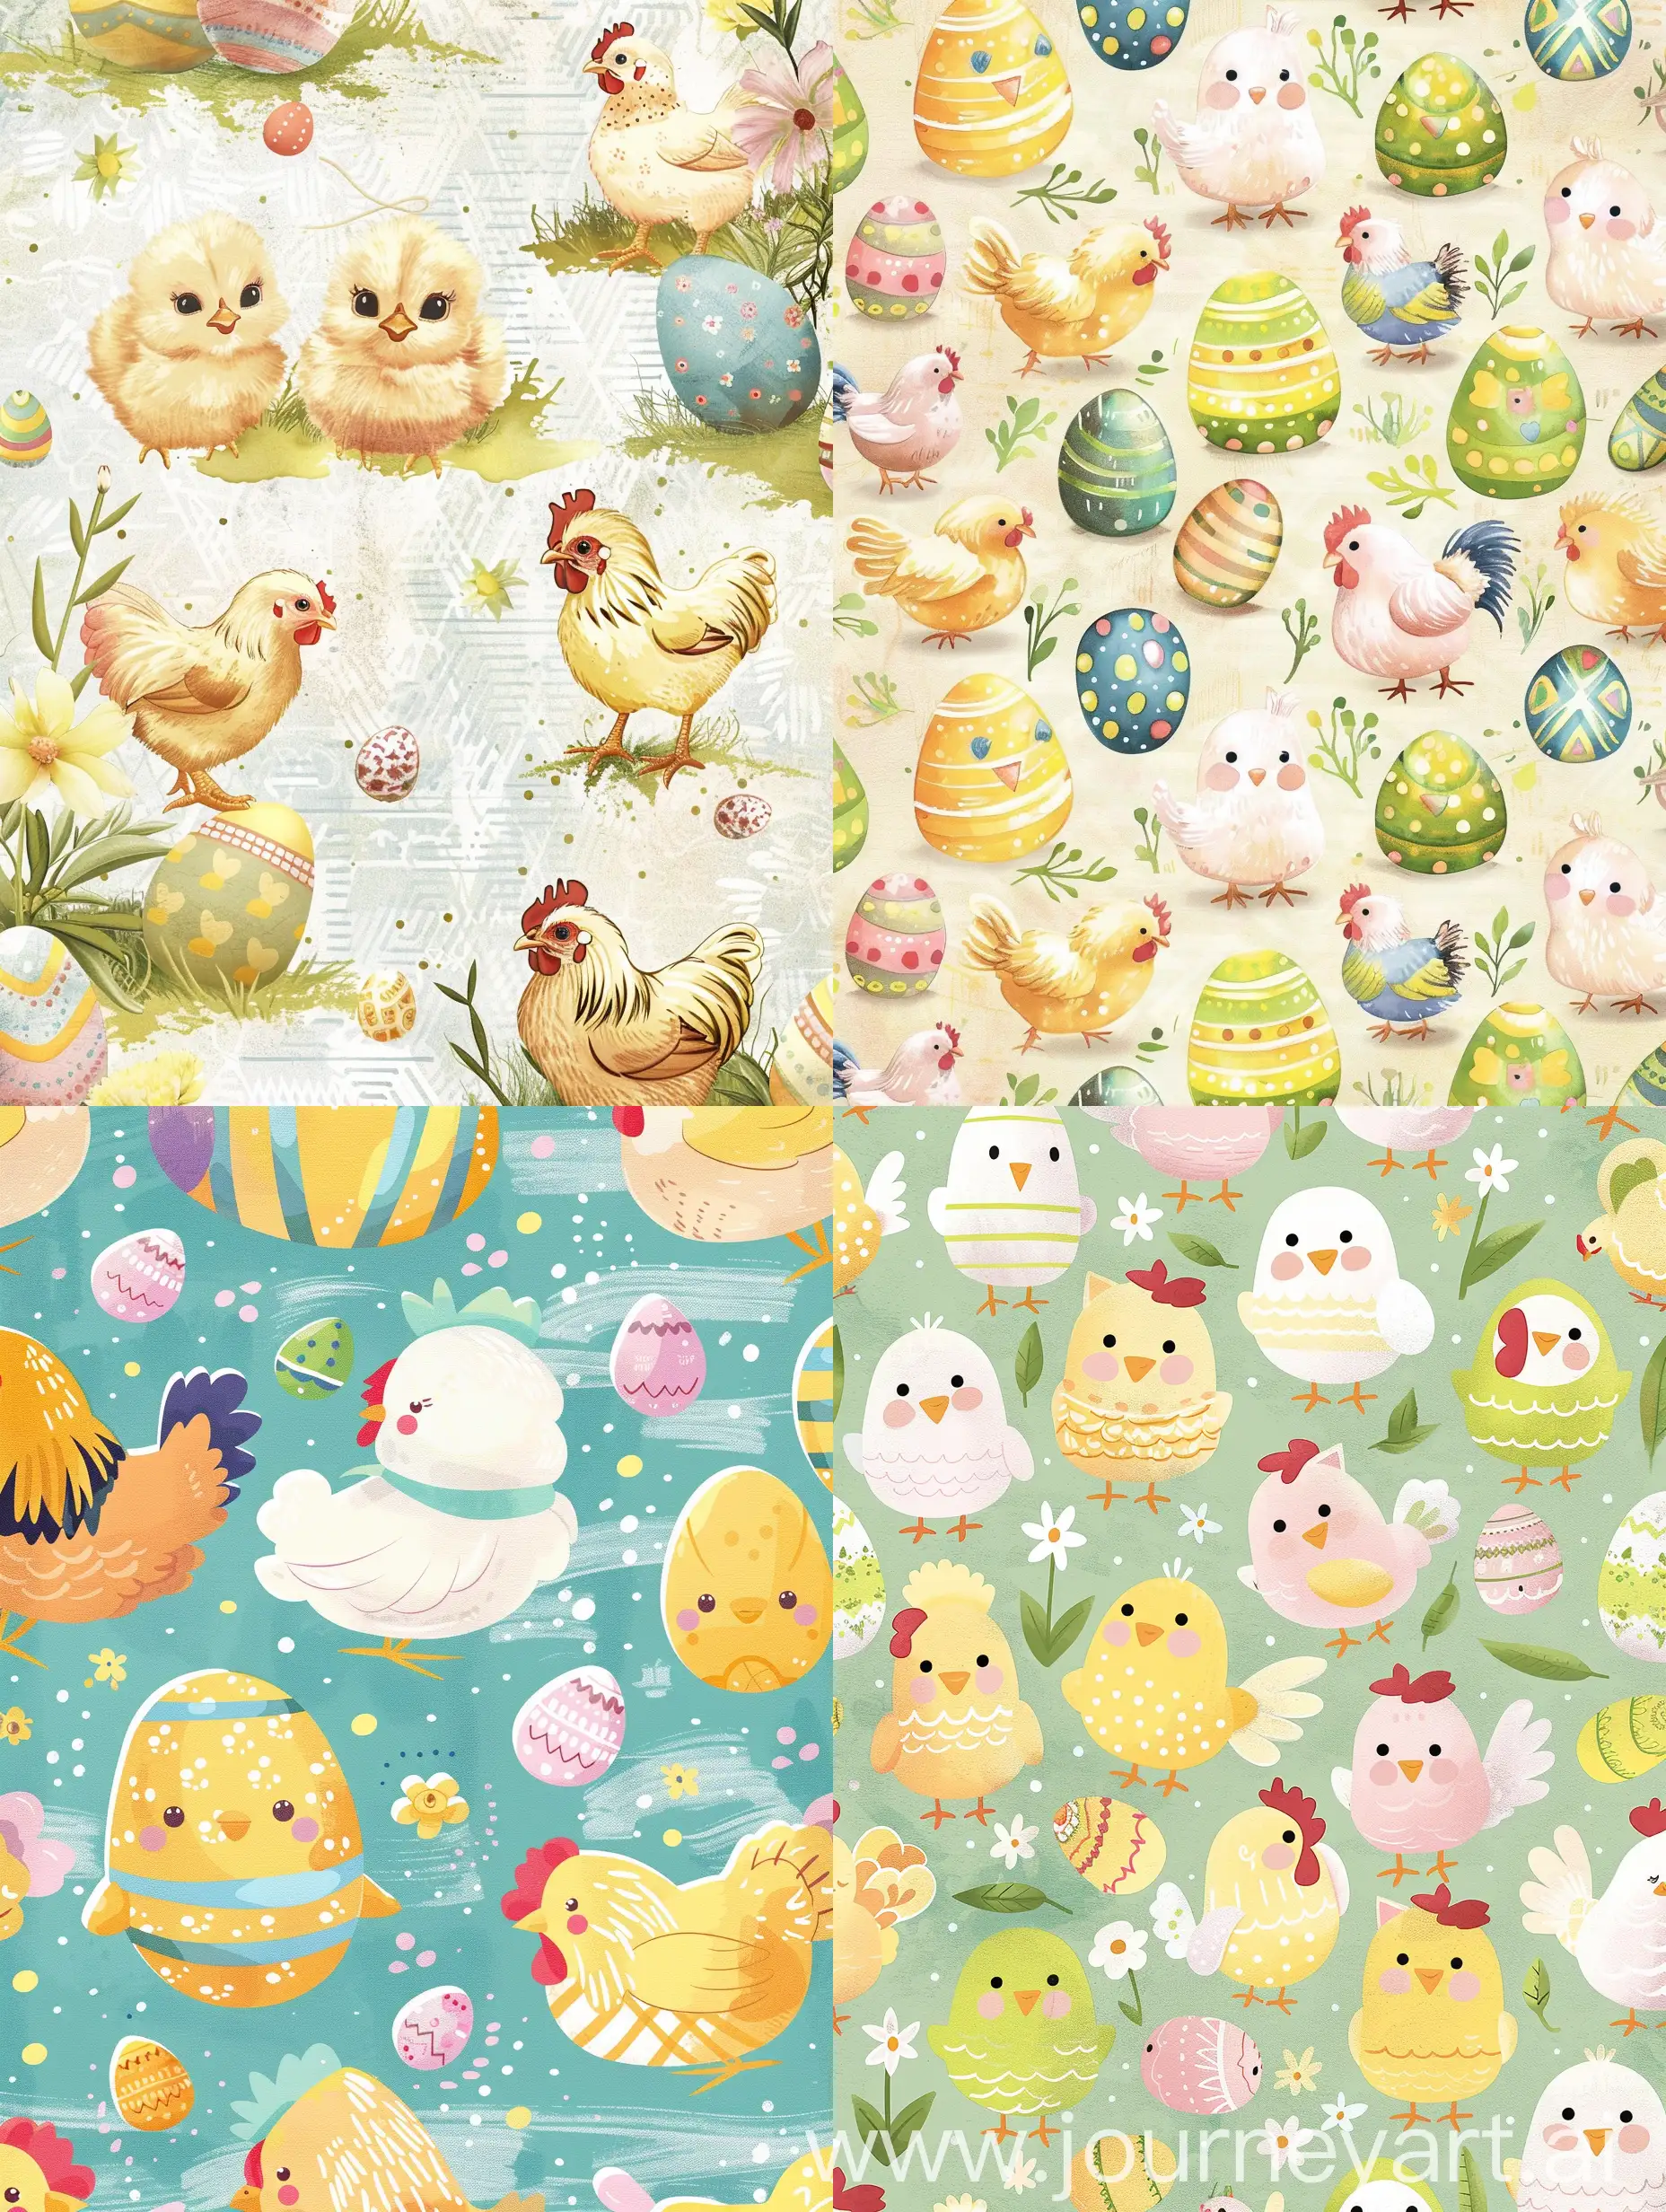 Cute Easter Digital Paper, Spring Background, Cute Animals Paper Pack, For Scrapbooking, For Cards, For Invitations, Junk Journal, Chickens